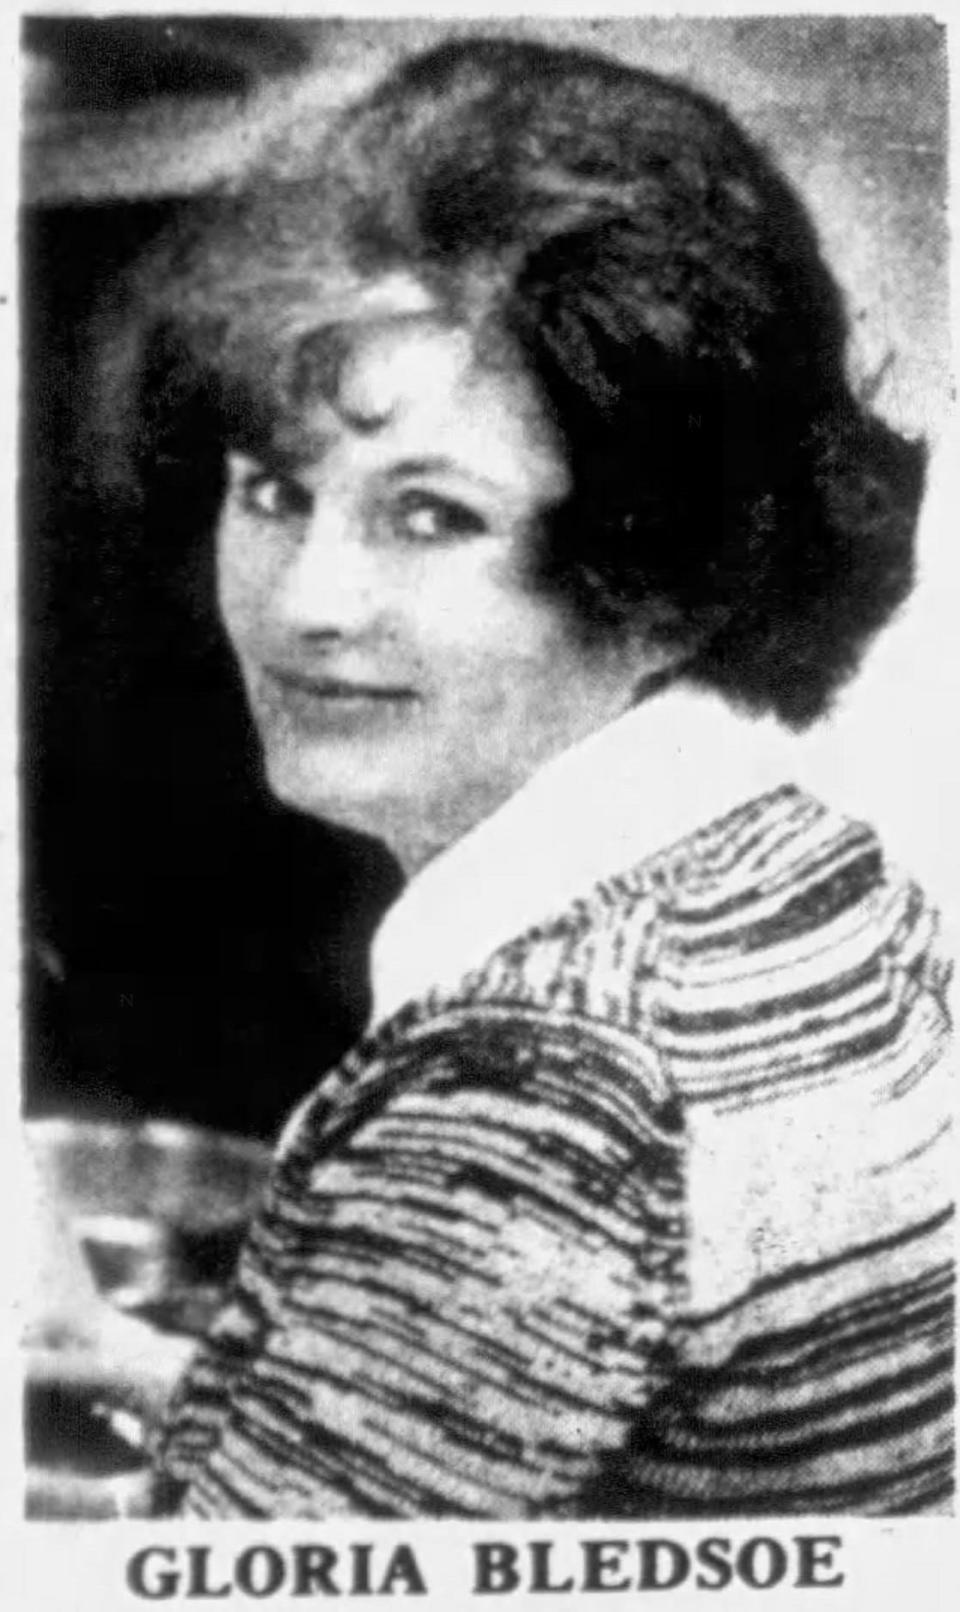 Gloria Bledsoe Goodman was long-time reporter, editor and columnist for the Capital Journal and Statesman Journal.